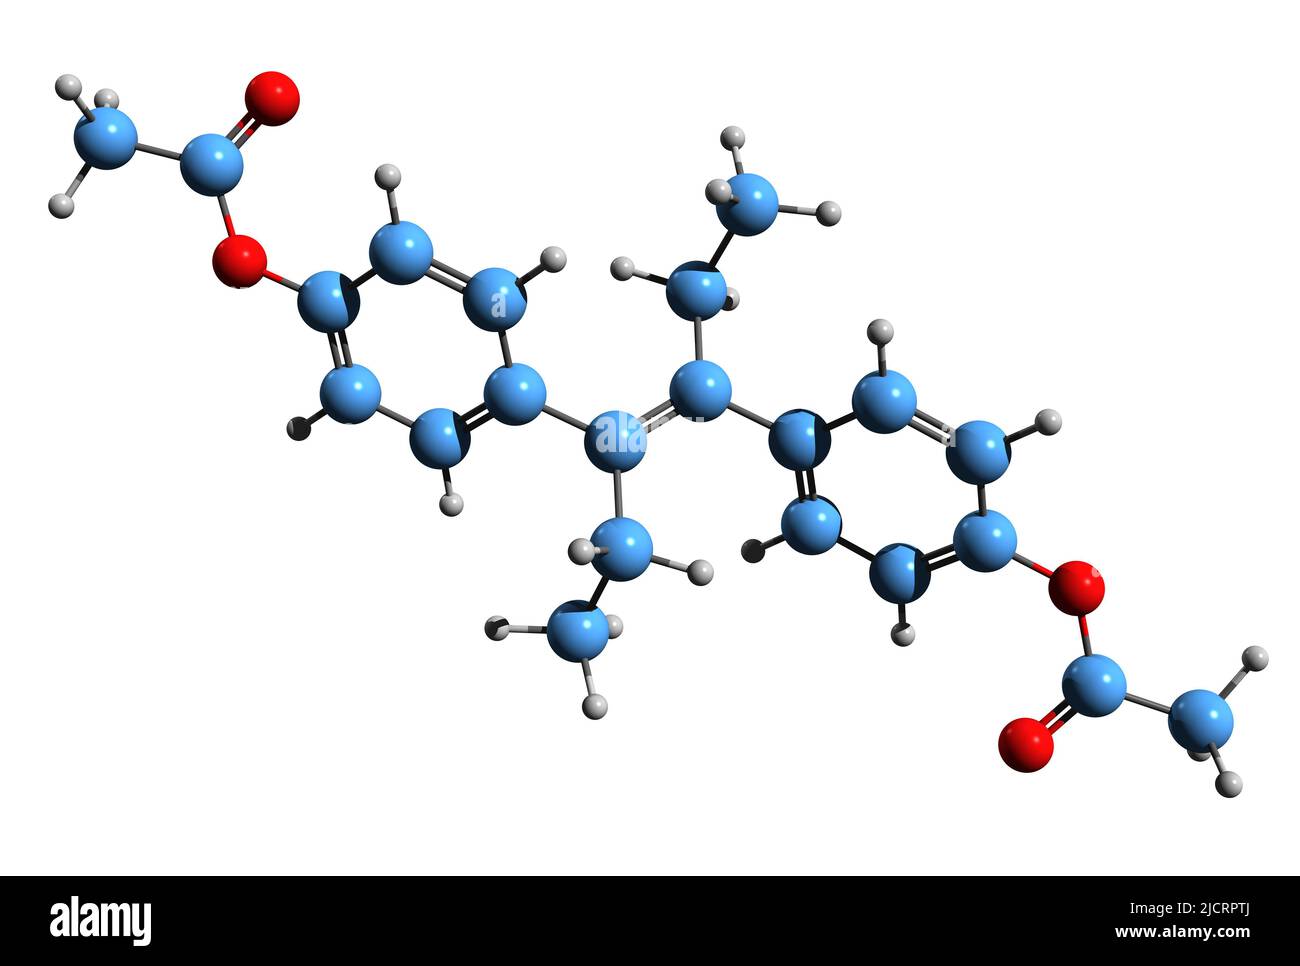 3D image of Diethylstilbestrol diacetate skeletal formula - molecular chemical structure of nonsteroidal estrogen isolated on white background Stock Photo